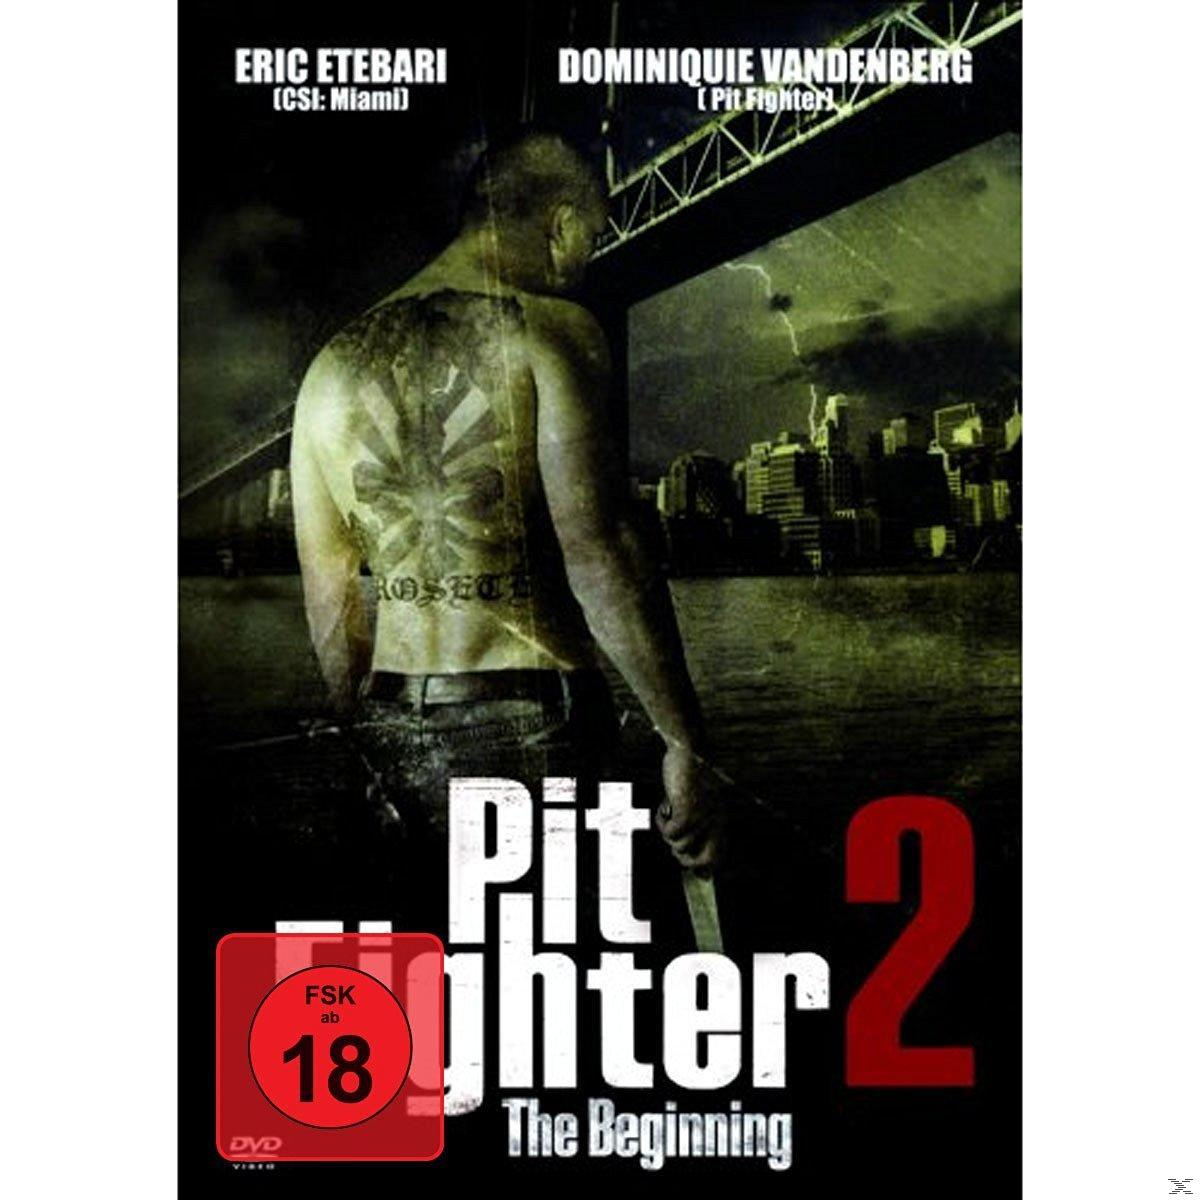 Fighter DVD Beginning The 2 Pit